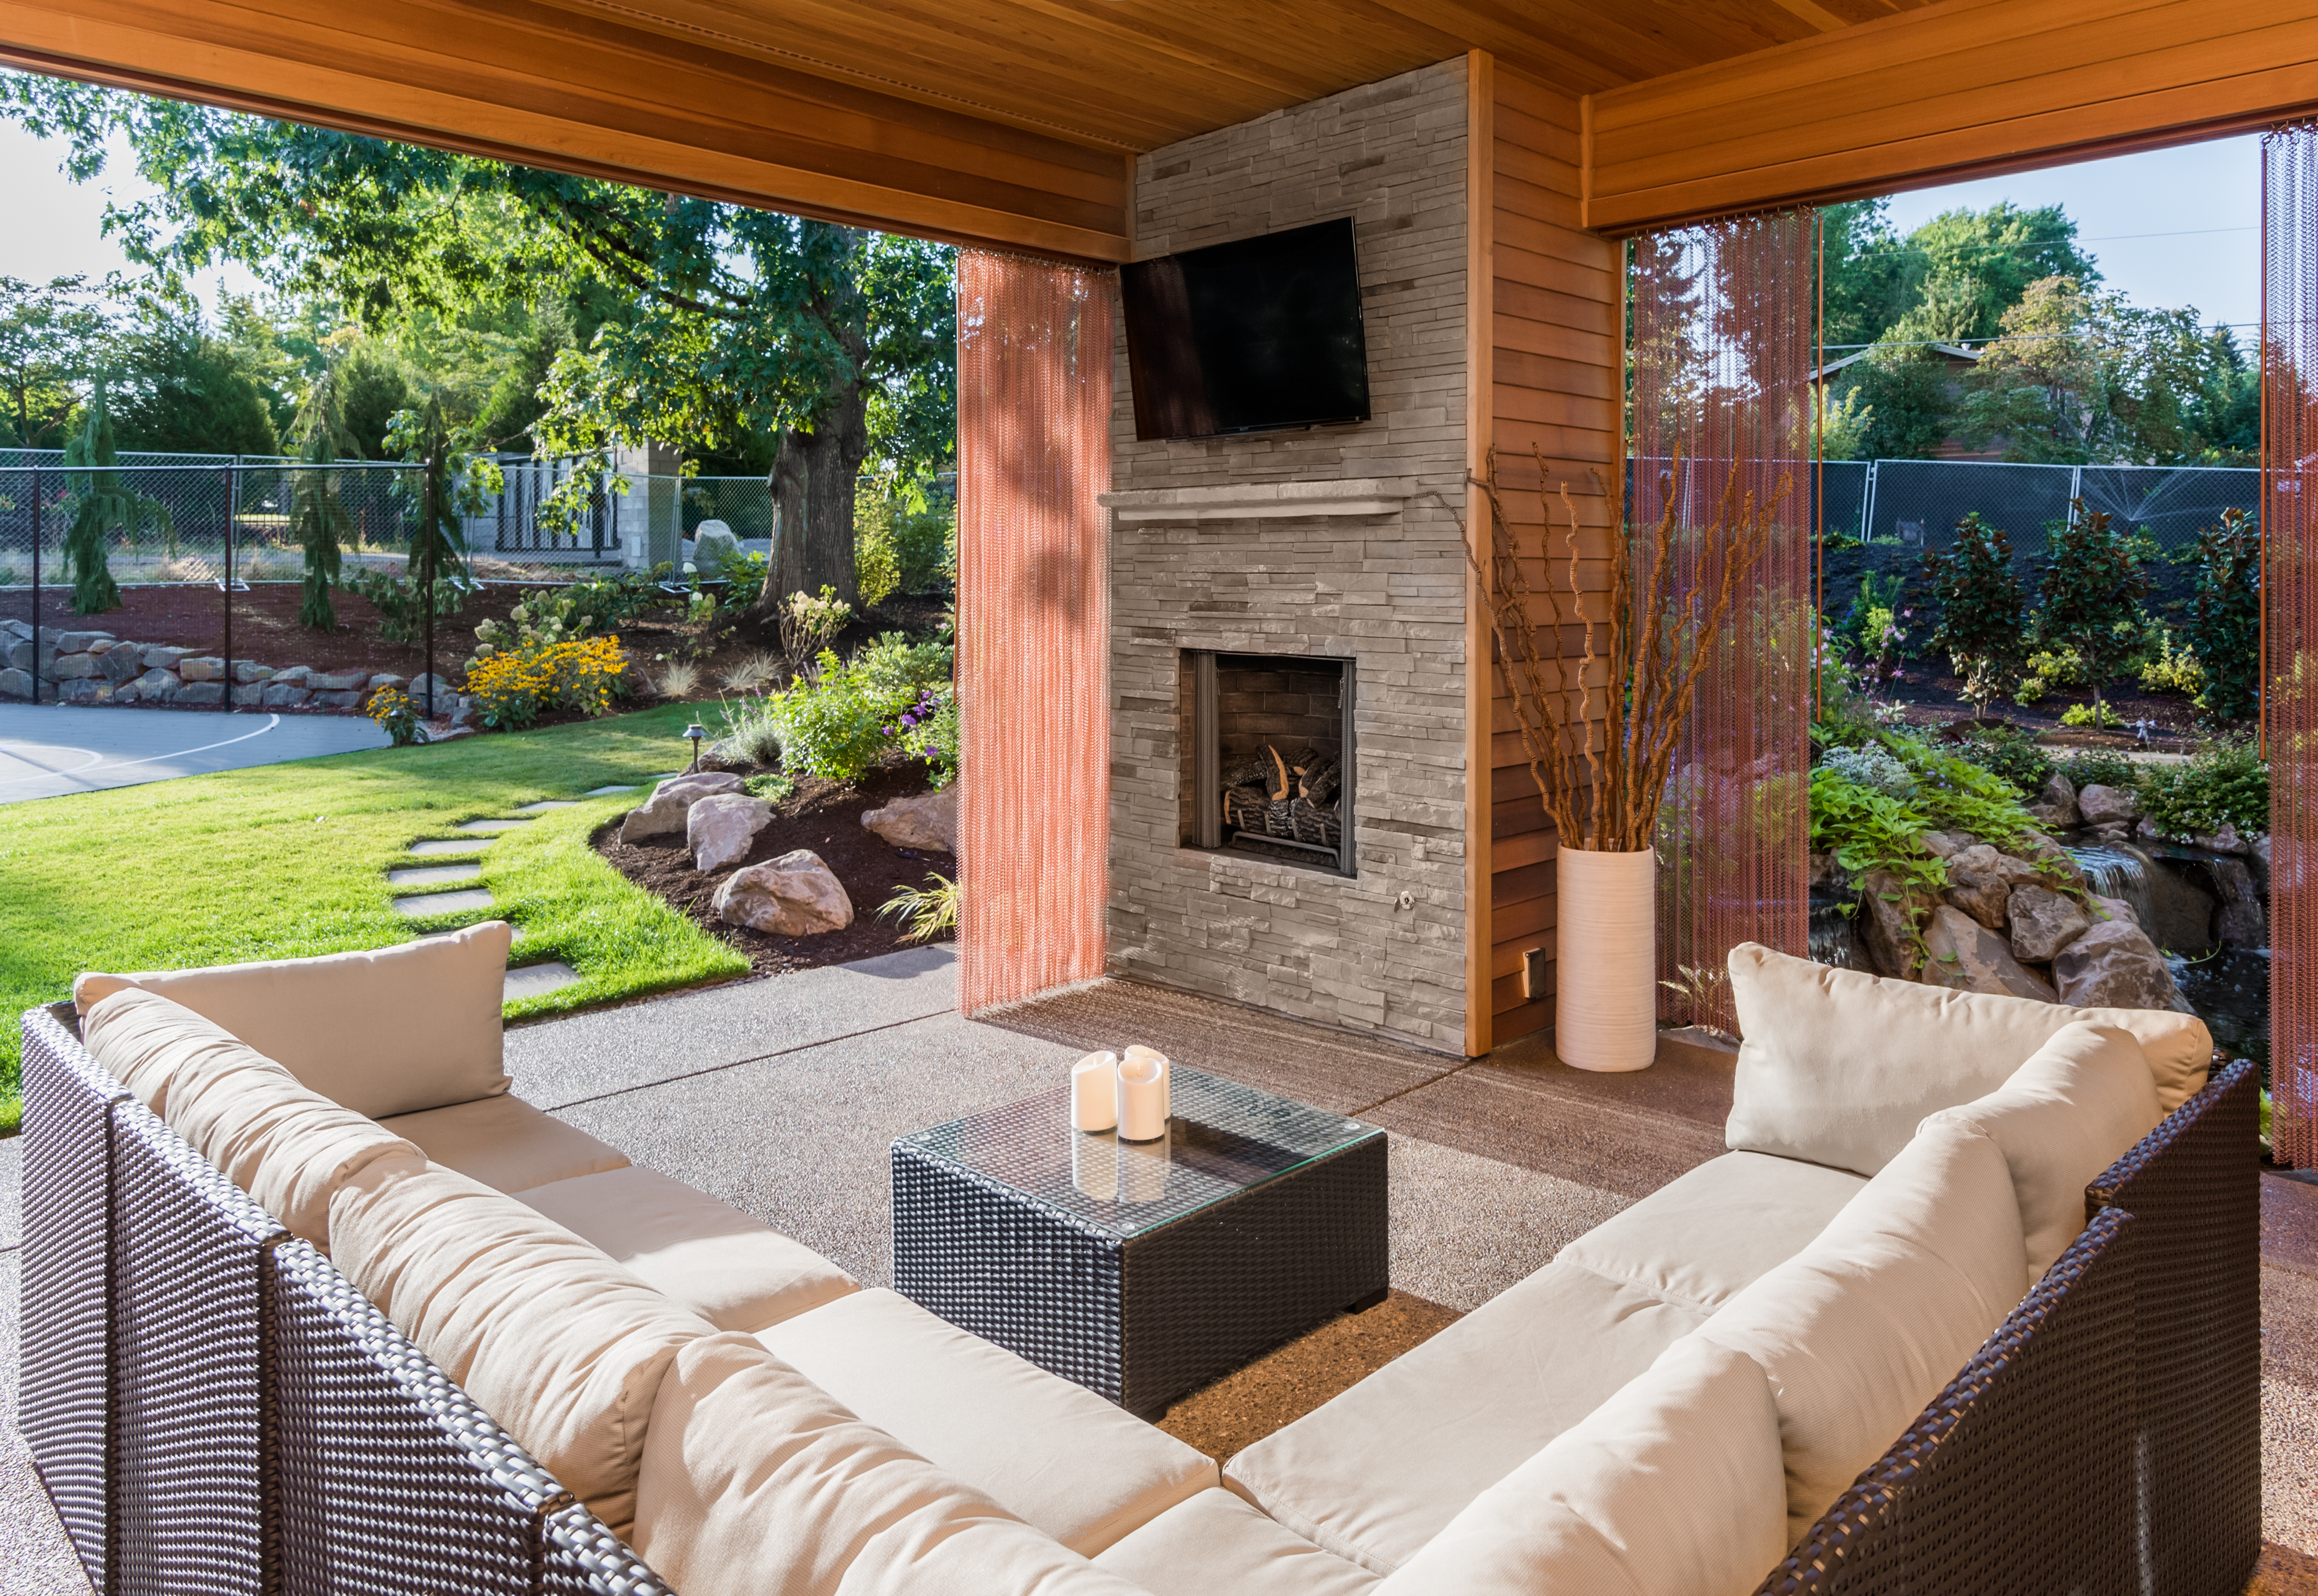 patio lounge with outdoor tv